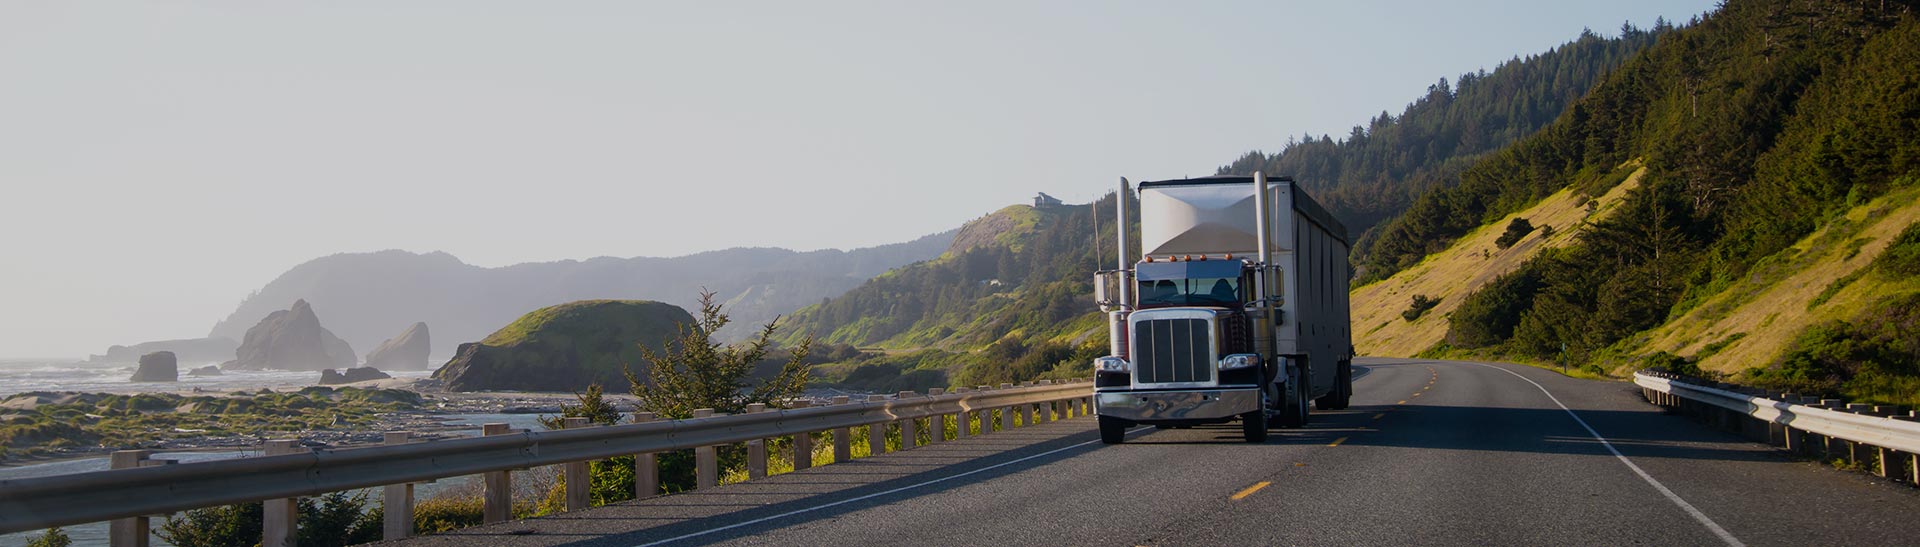 Seattle Trucking Company, Trucking Services and Freight Forwarding Services